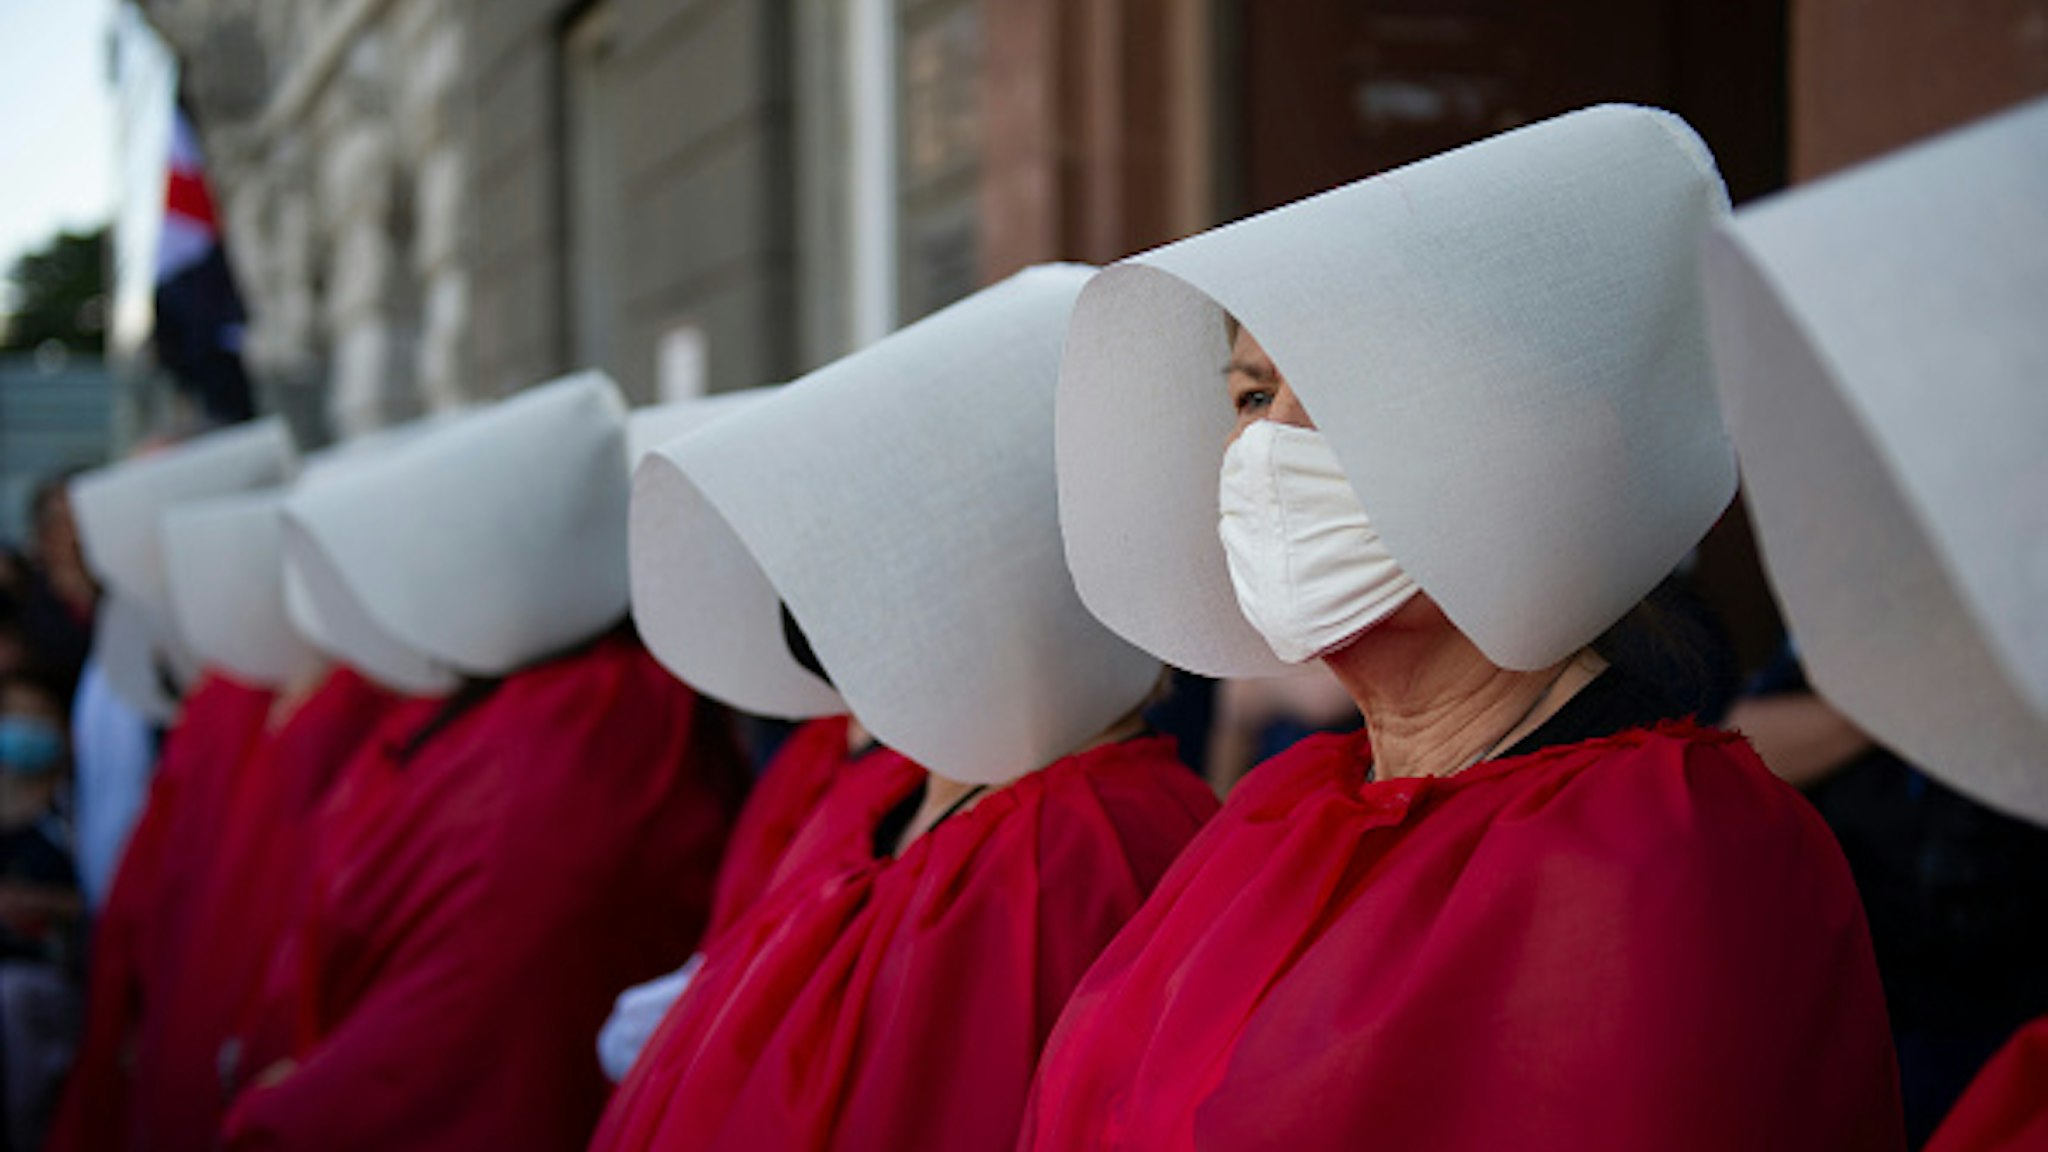 Demonstrators wearing protective face masks are dressed as the Handmaids from the dystopian novel The Handmaid's Tale from the Canadian author Margaret Atwood perform during an anti-domestic violence protest on July 24, 2020 in Warsaw, Poland. Thousands of demonstrators took part in a protest against government plan to pull out of an international treaty on preventing and combating domestic violence.